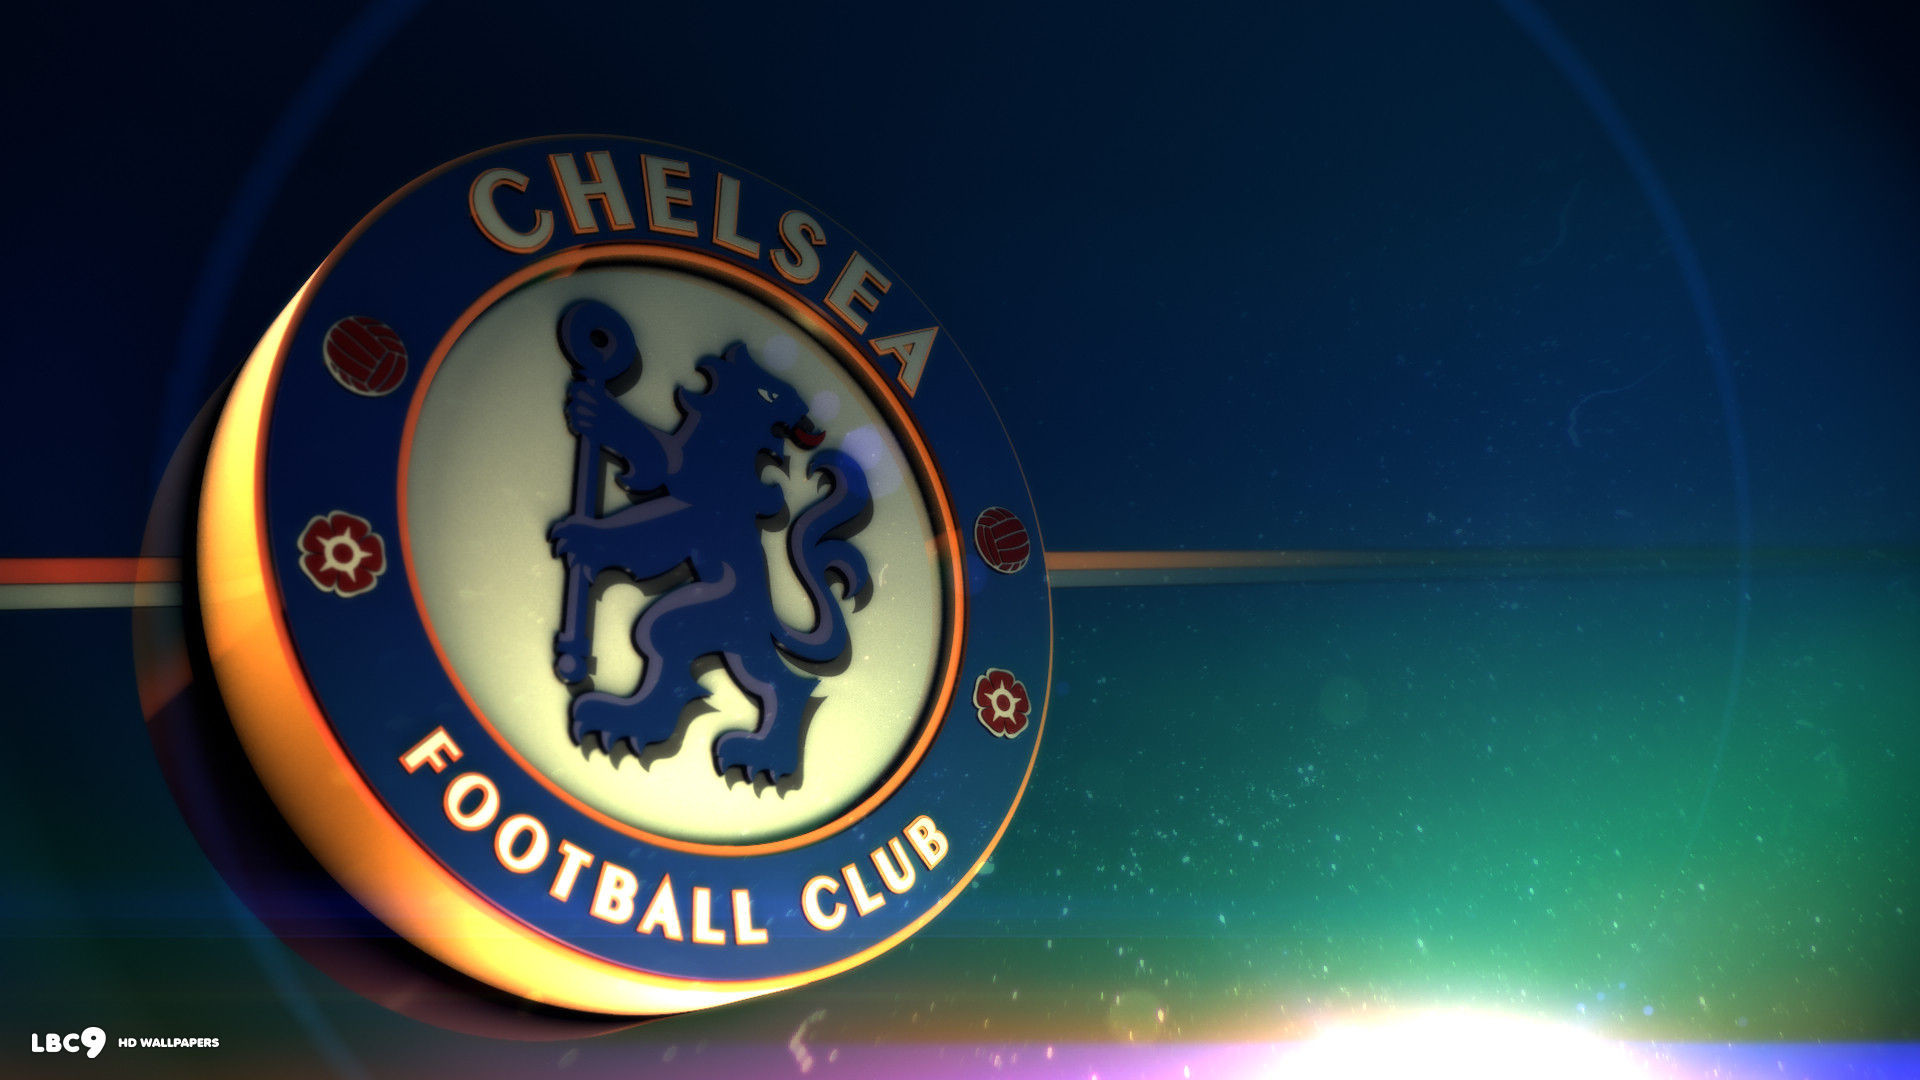 1920x1080 Search Results for “chelsea hd wallpapers – Adorable Wallpapers